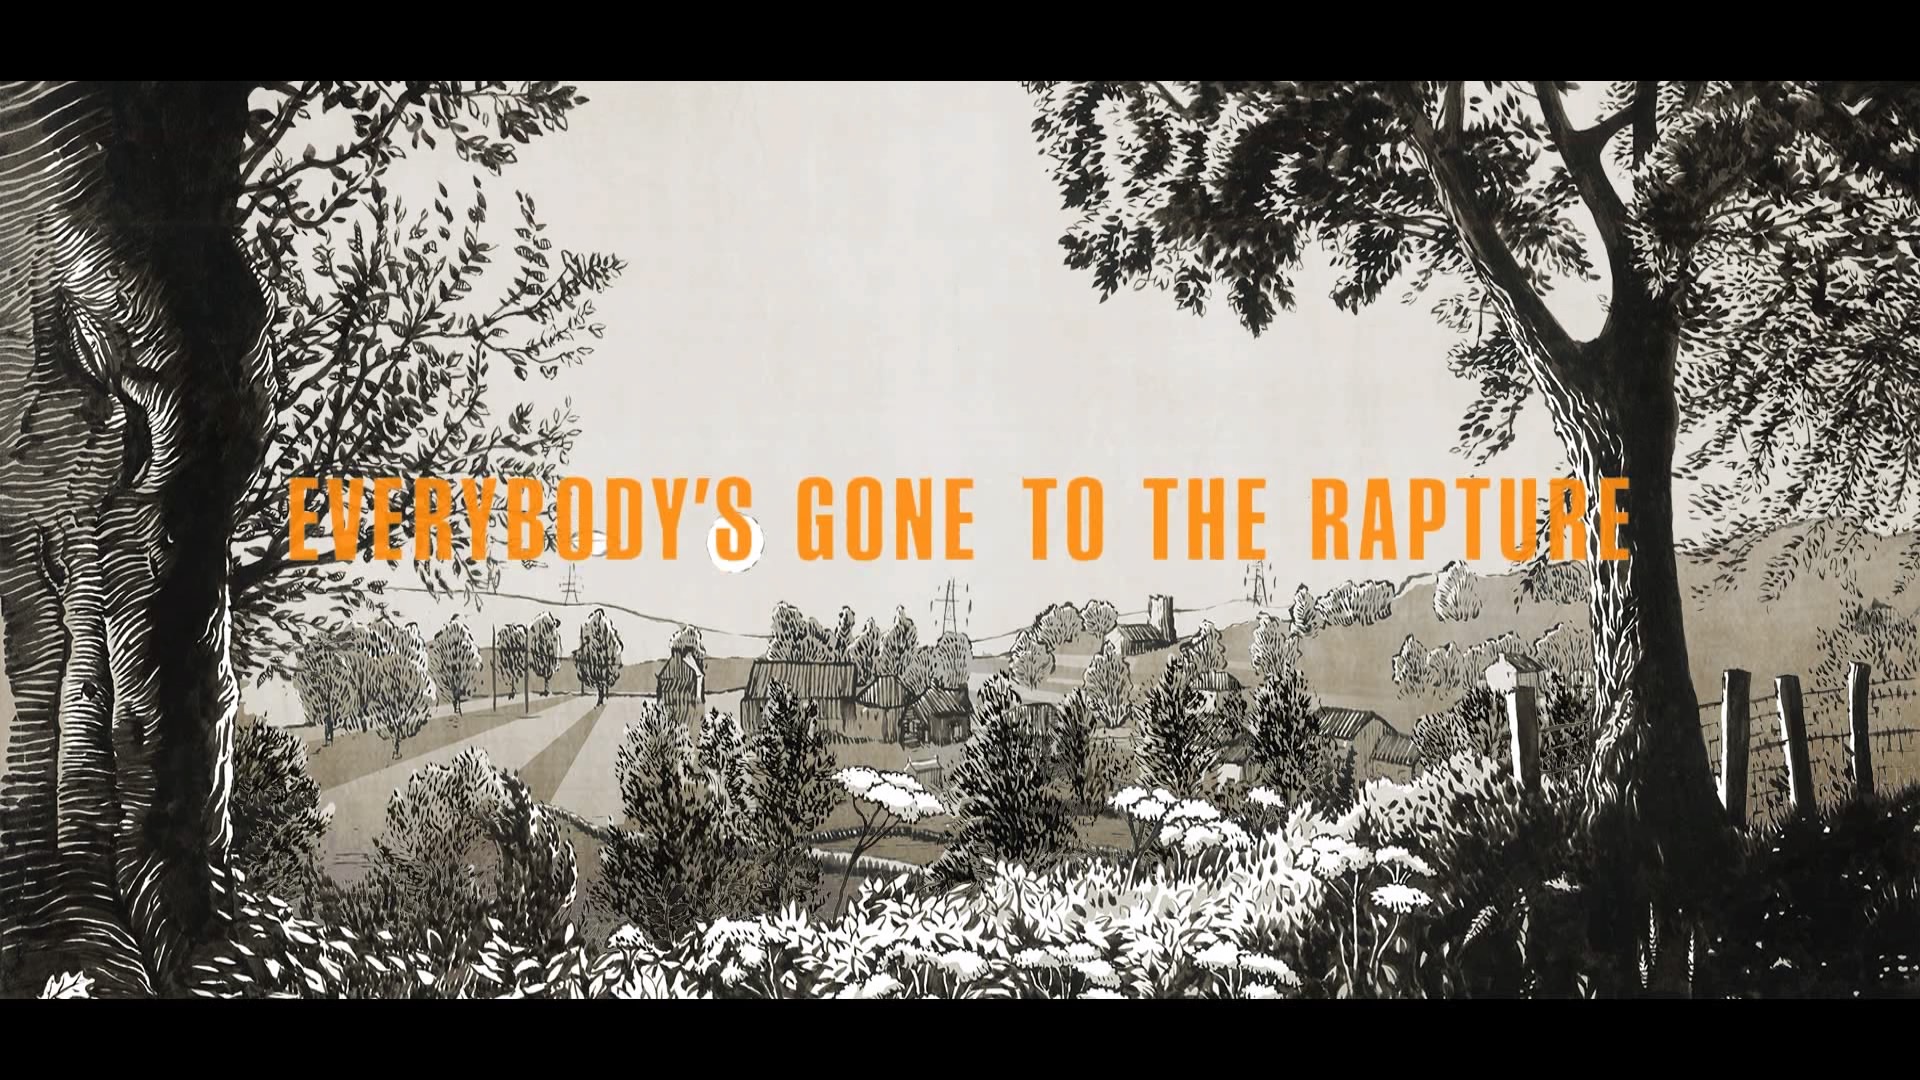 Everybody's gone to the rapture